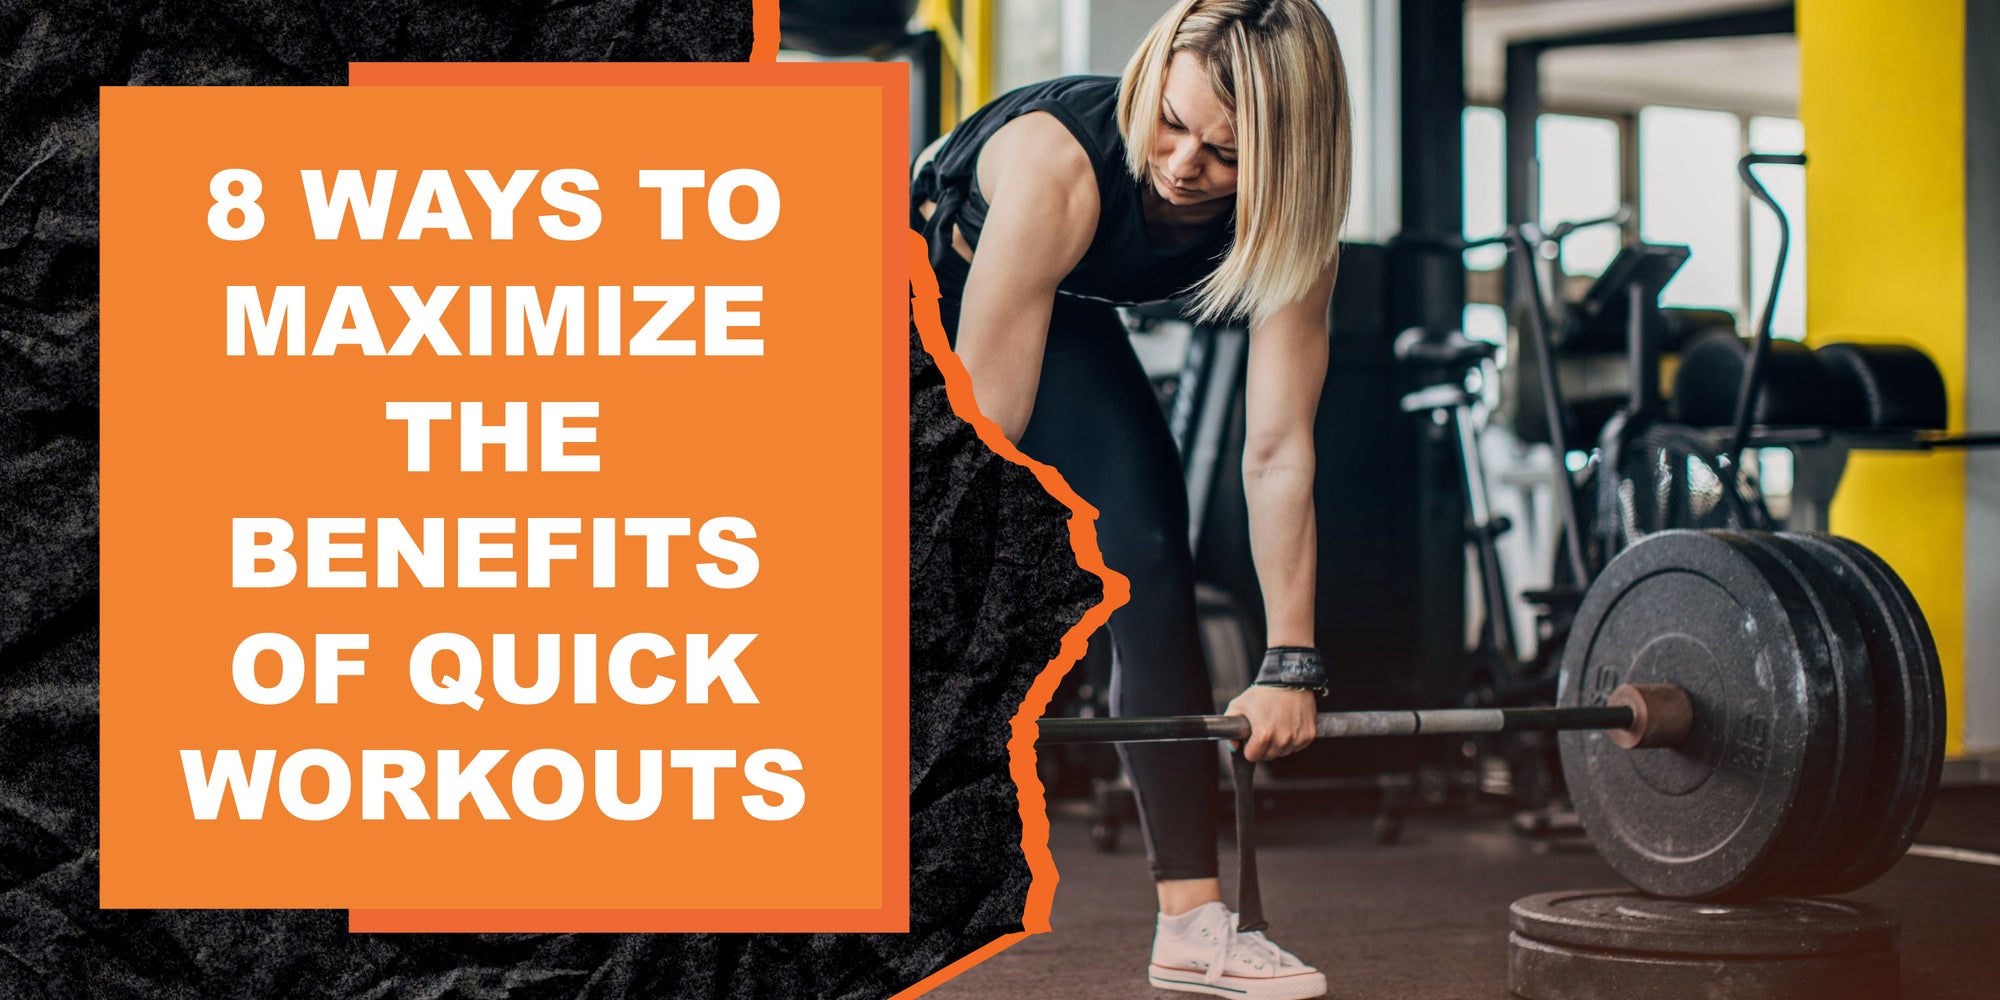 8 Ways to Maximize the Benefits of Quick Workouts